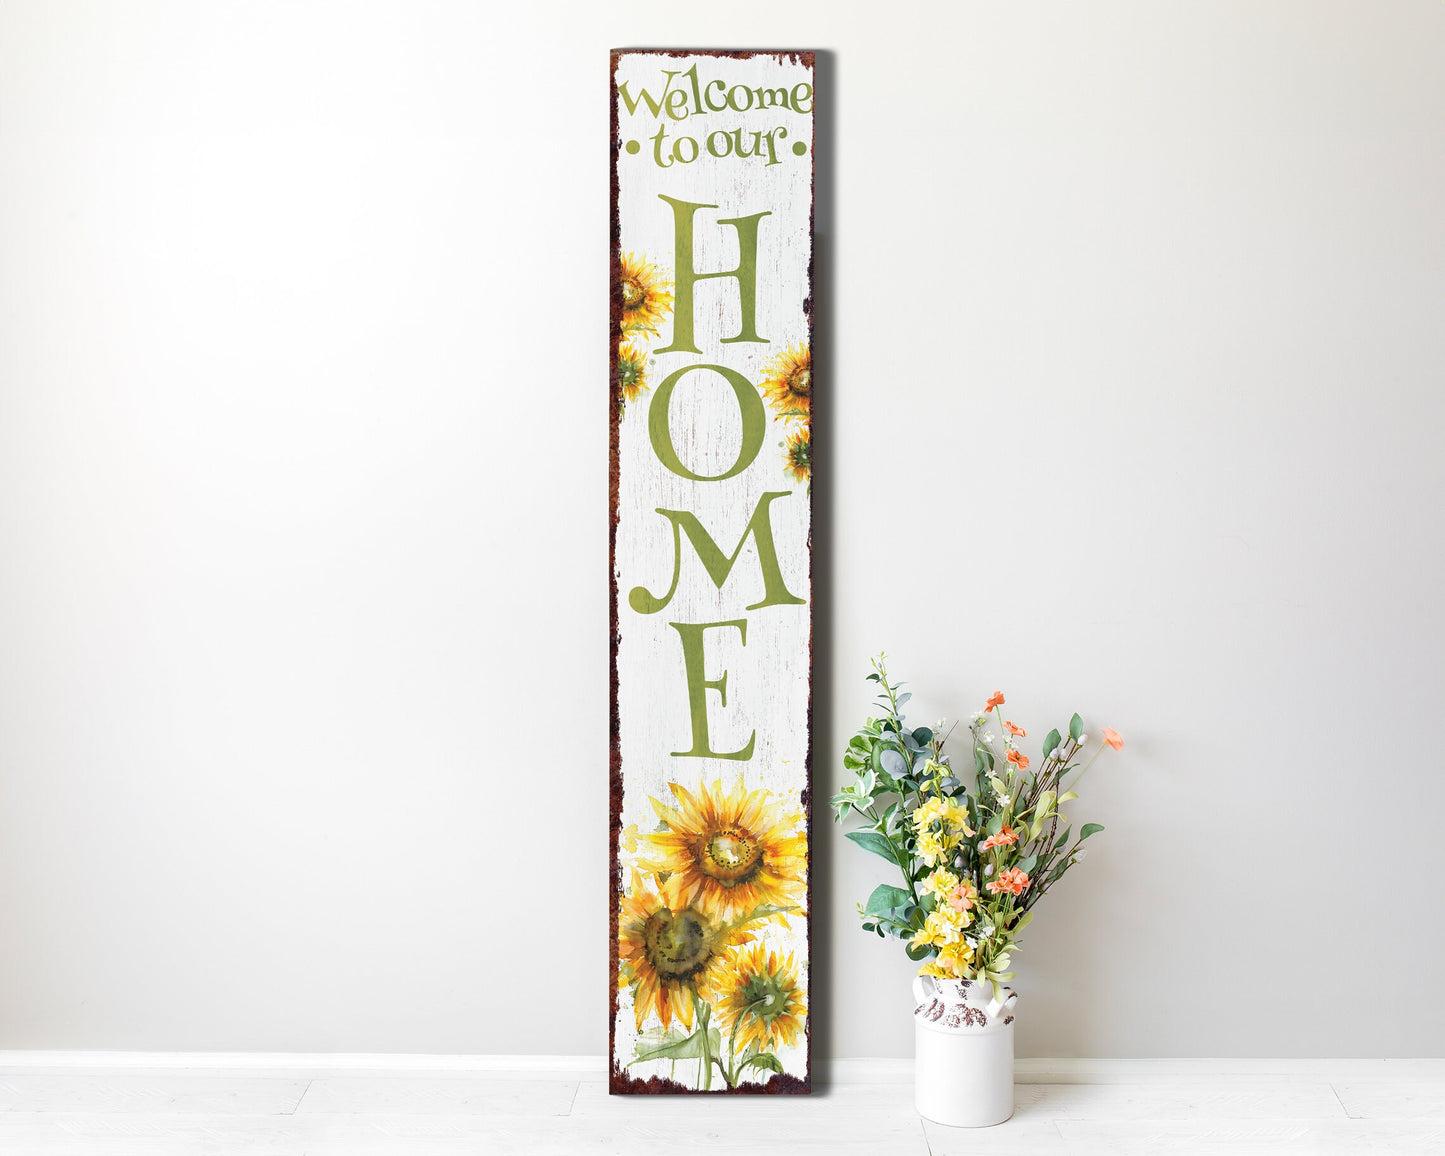 48in "Welcome to Our Home" Sunflower Porch Sign - Summer Watercolor Design - Rustic Farmhouse Decor for Door, Wall, Entryway